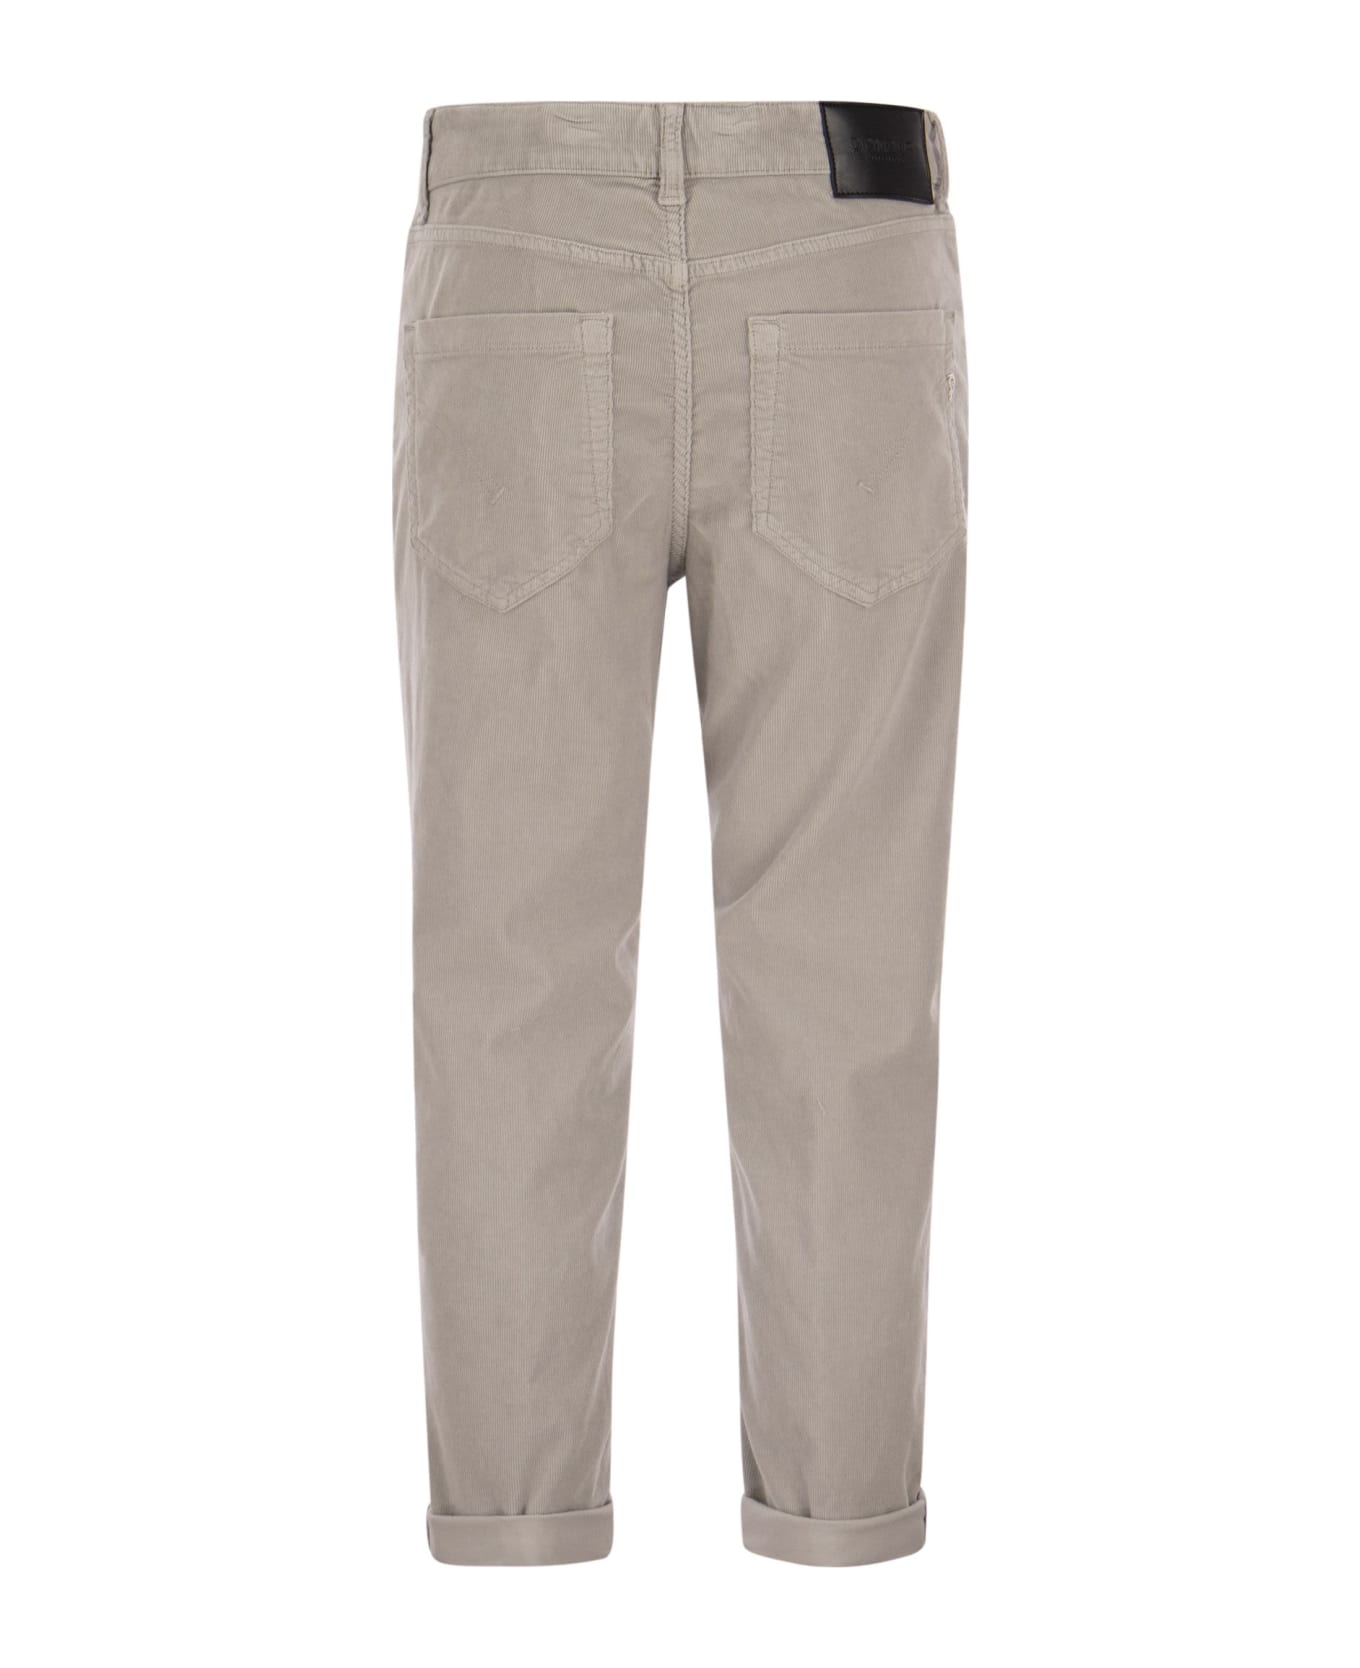 Dondup Koons - Multi-striped Velvet Trousers With Jewelled Buttons - Grey